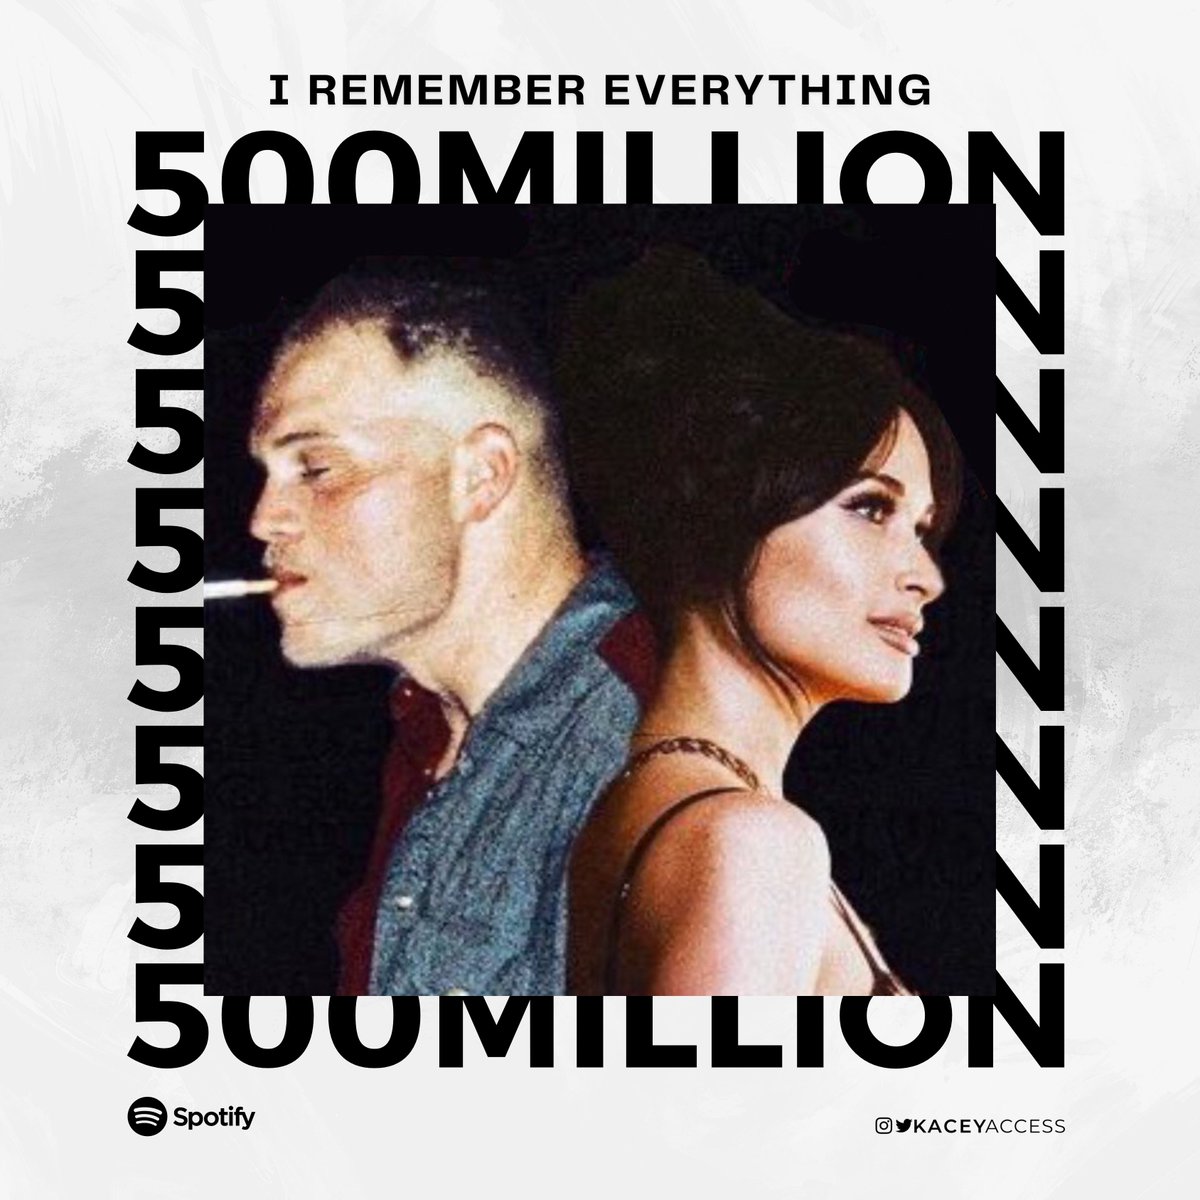 Zach Bryan and Kacey Musgraves’ “I Remember Everything” has now surpassed 500 MILLION streams on Spotify. — It’s her 1st song to achieve this milestone.